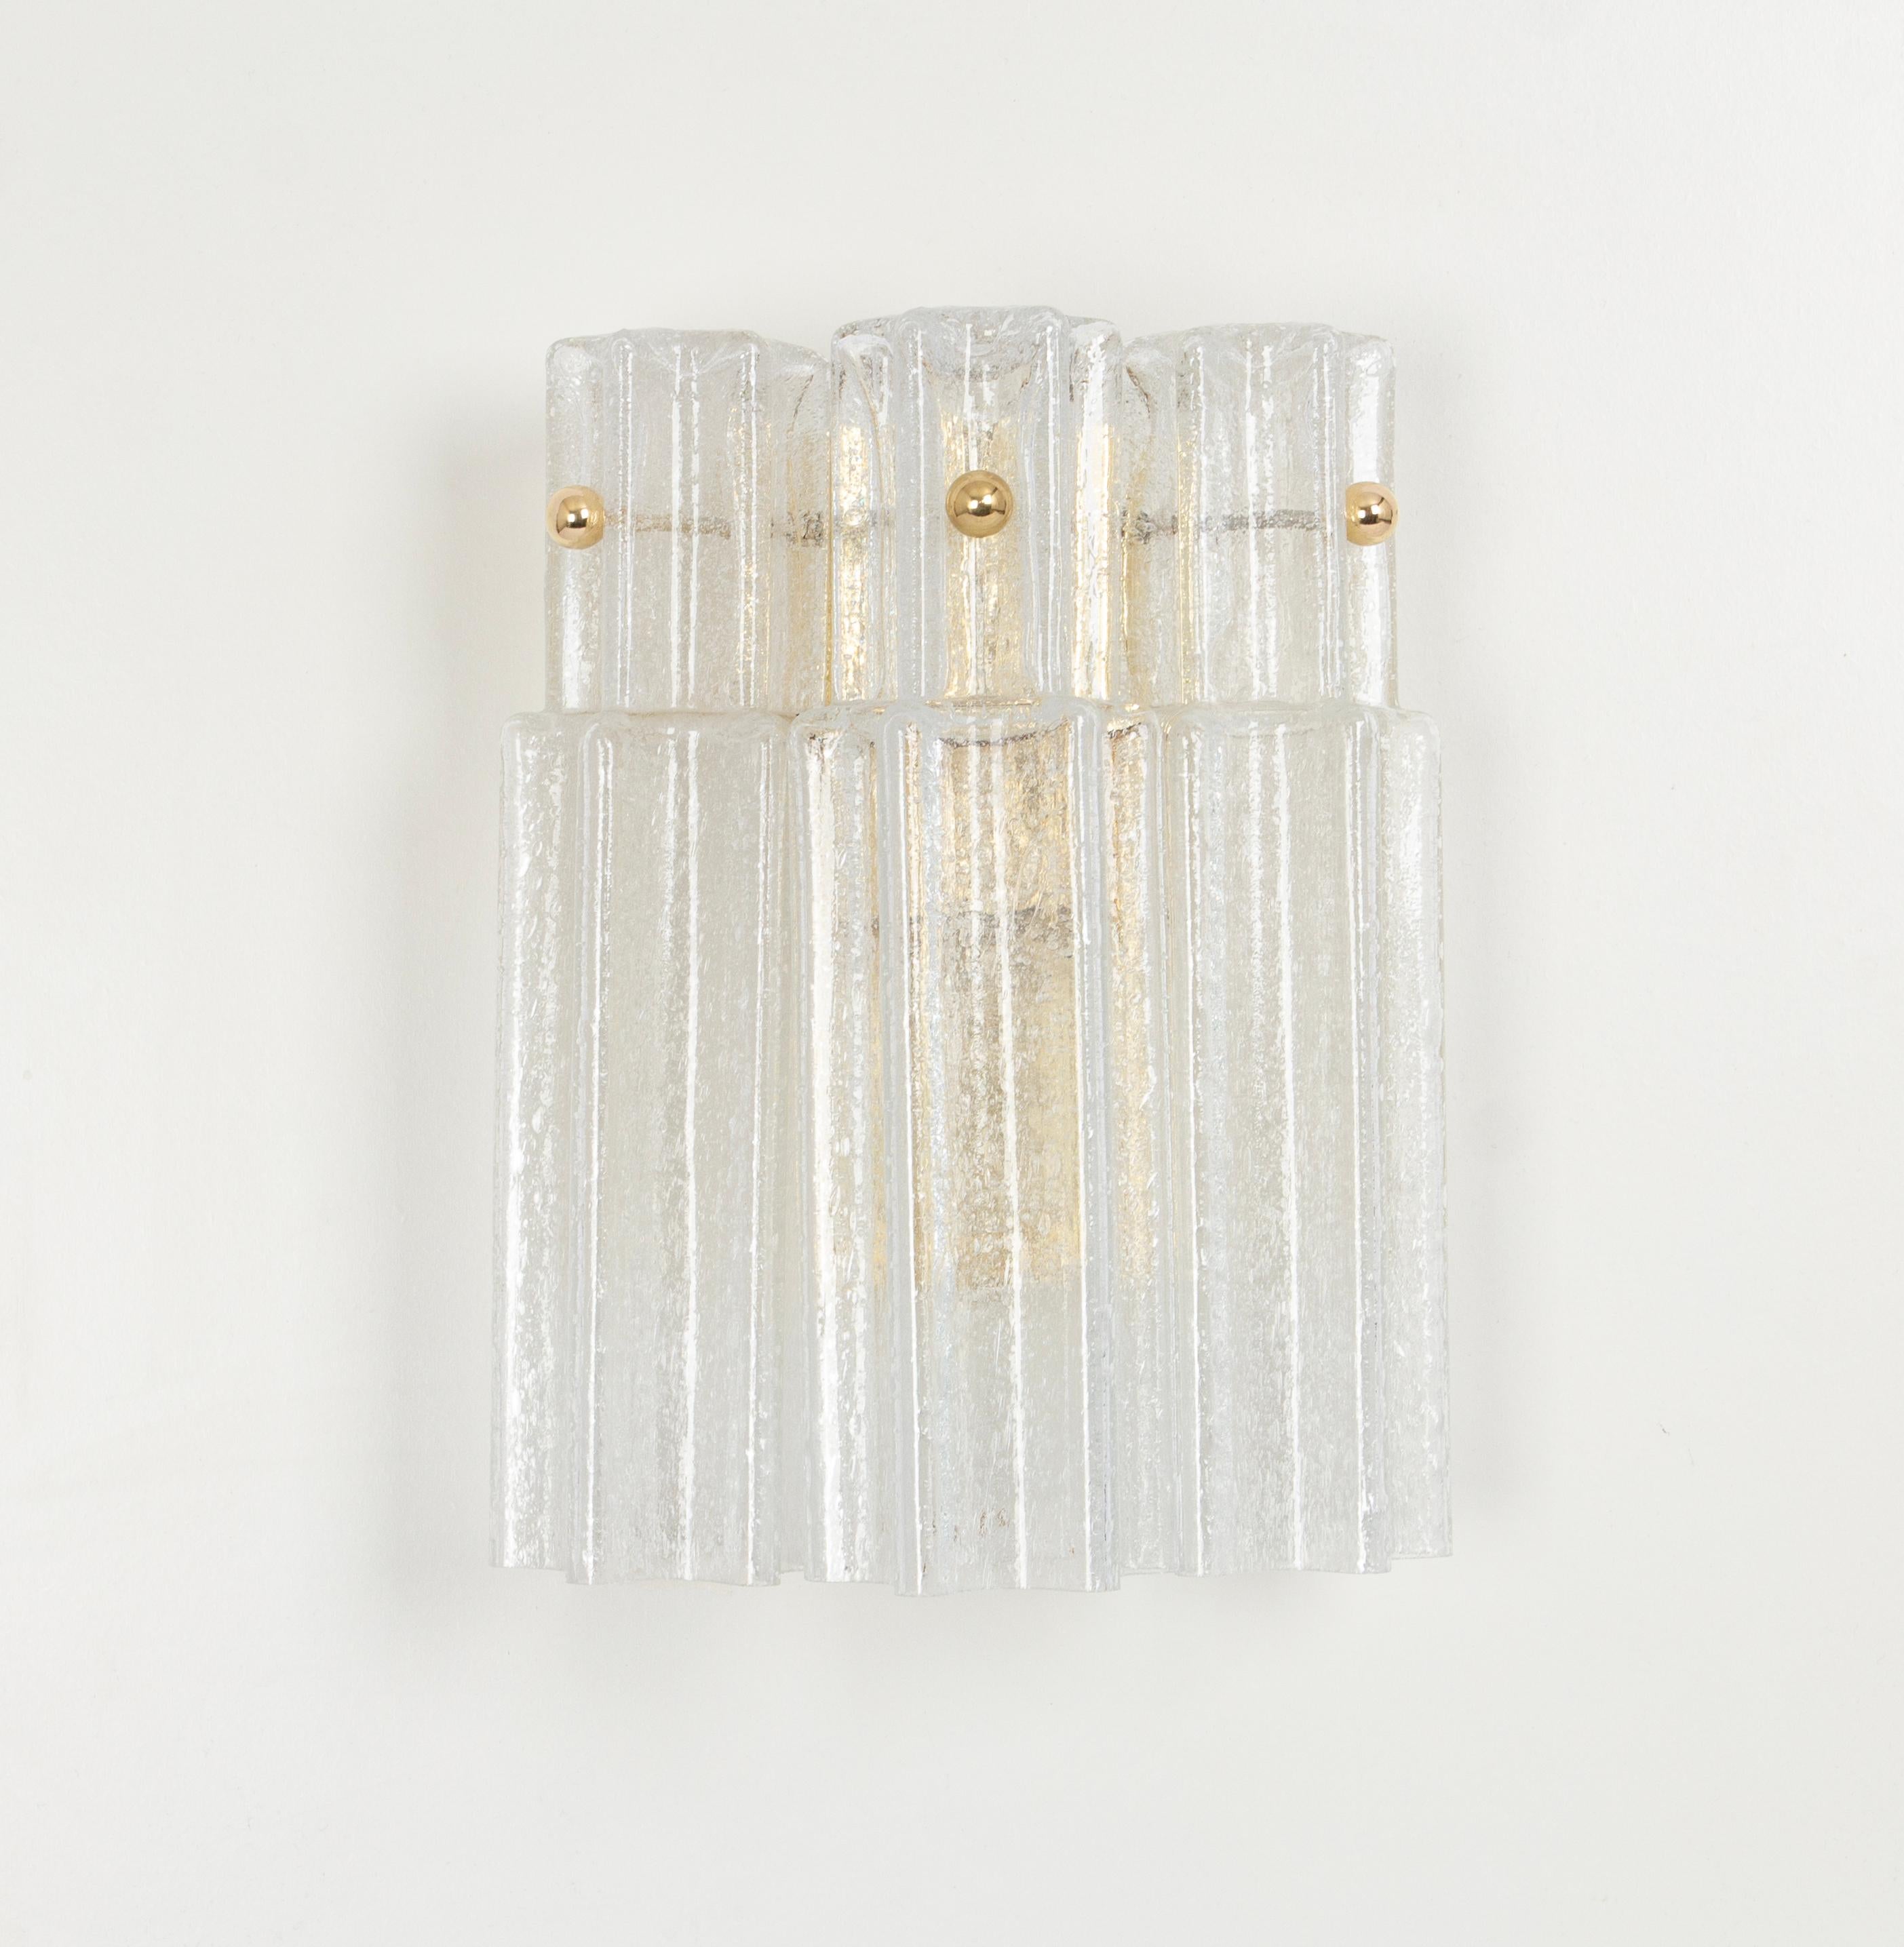 Beautiful wall light with 3 frosted glasses on a brass frame-design by Glashütte Limburg, Germany. Manufactured in midcentury, circa 1960.
High quality and in very good condition. Cleaned, well-wired and ready to use. 

The fixture requires one